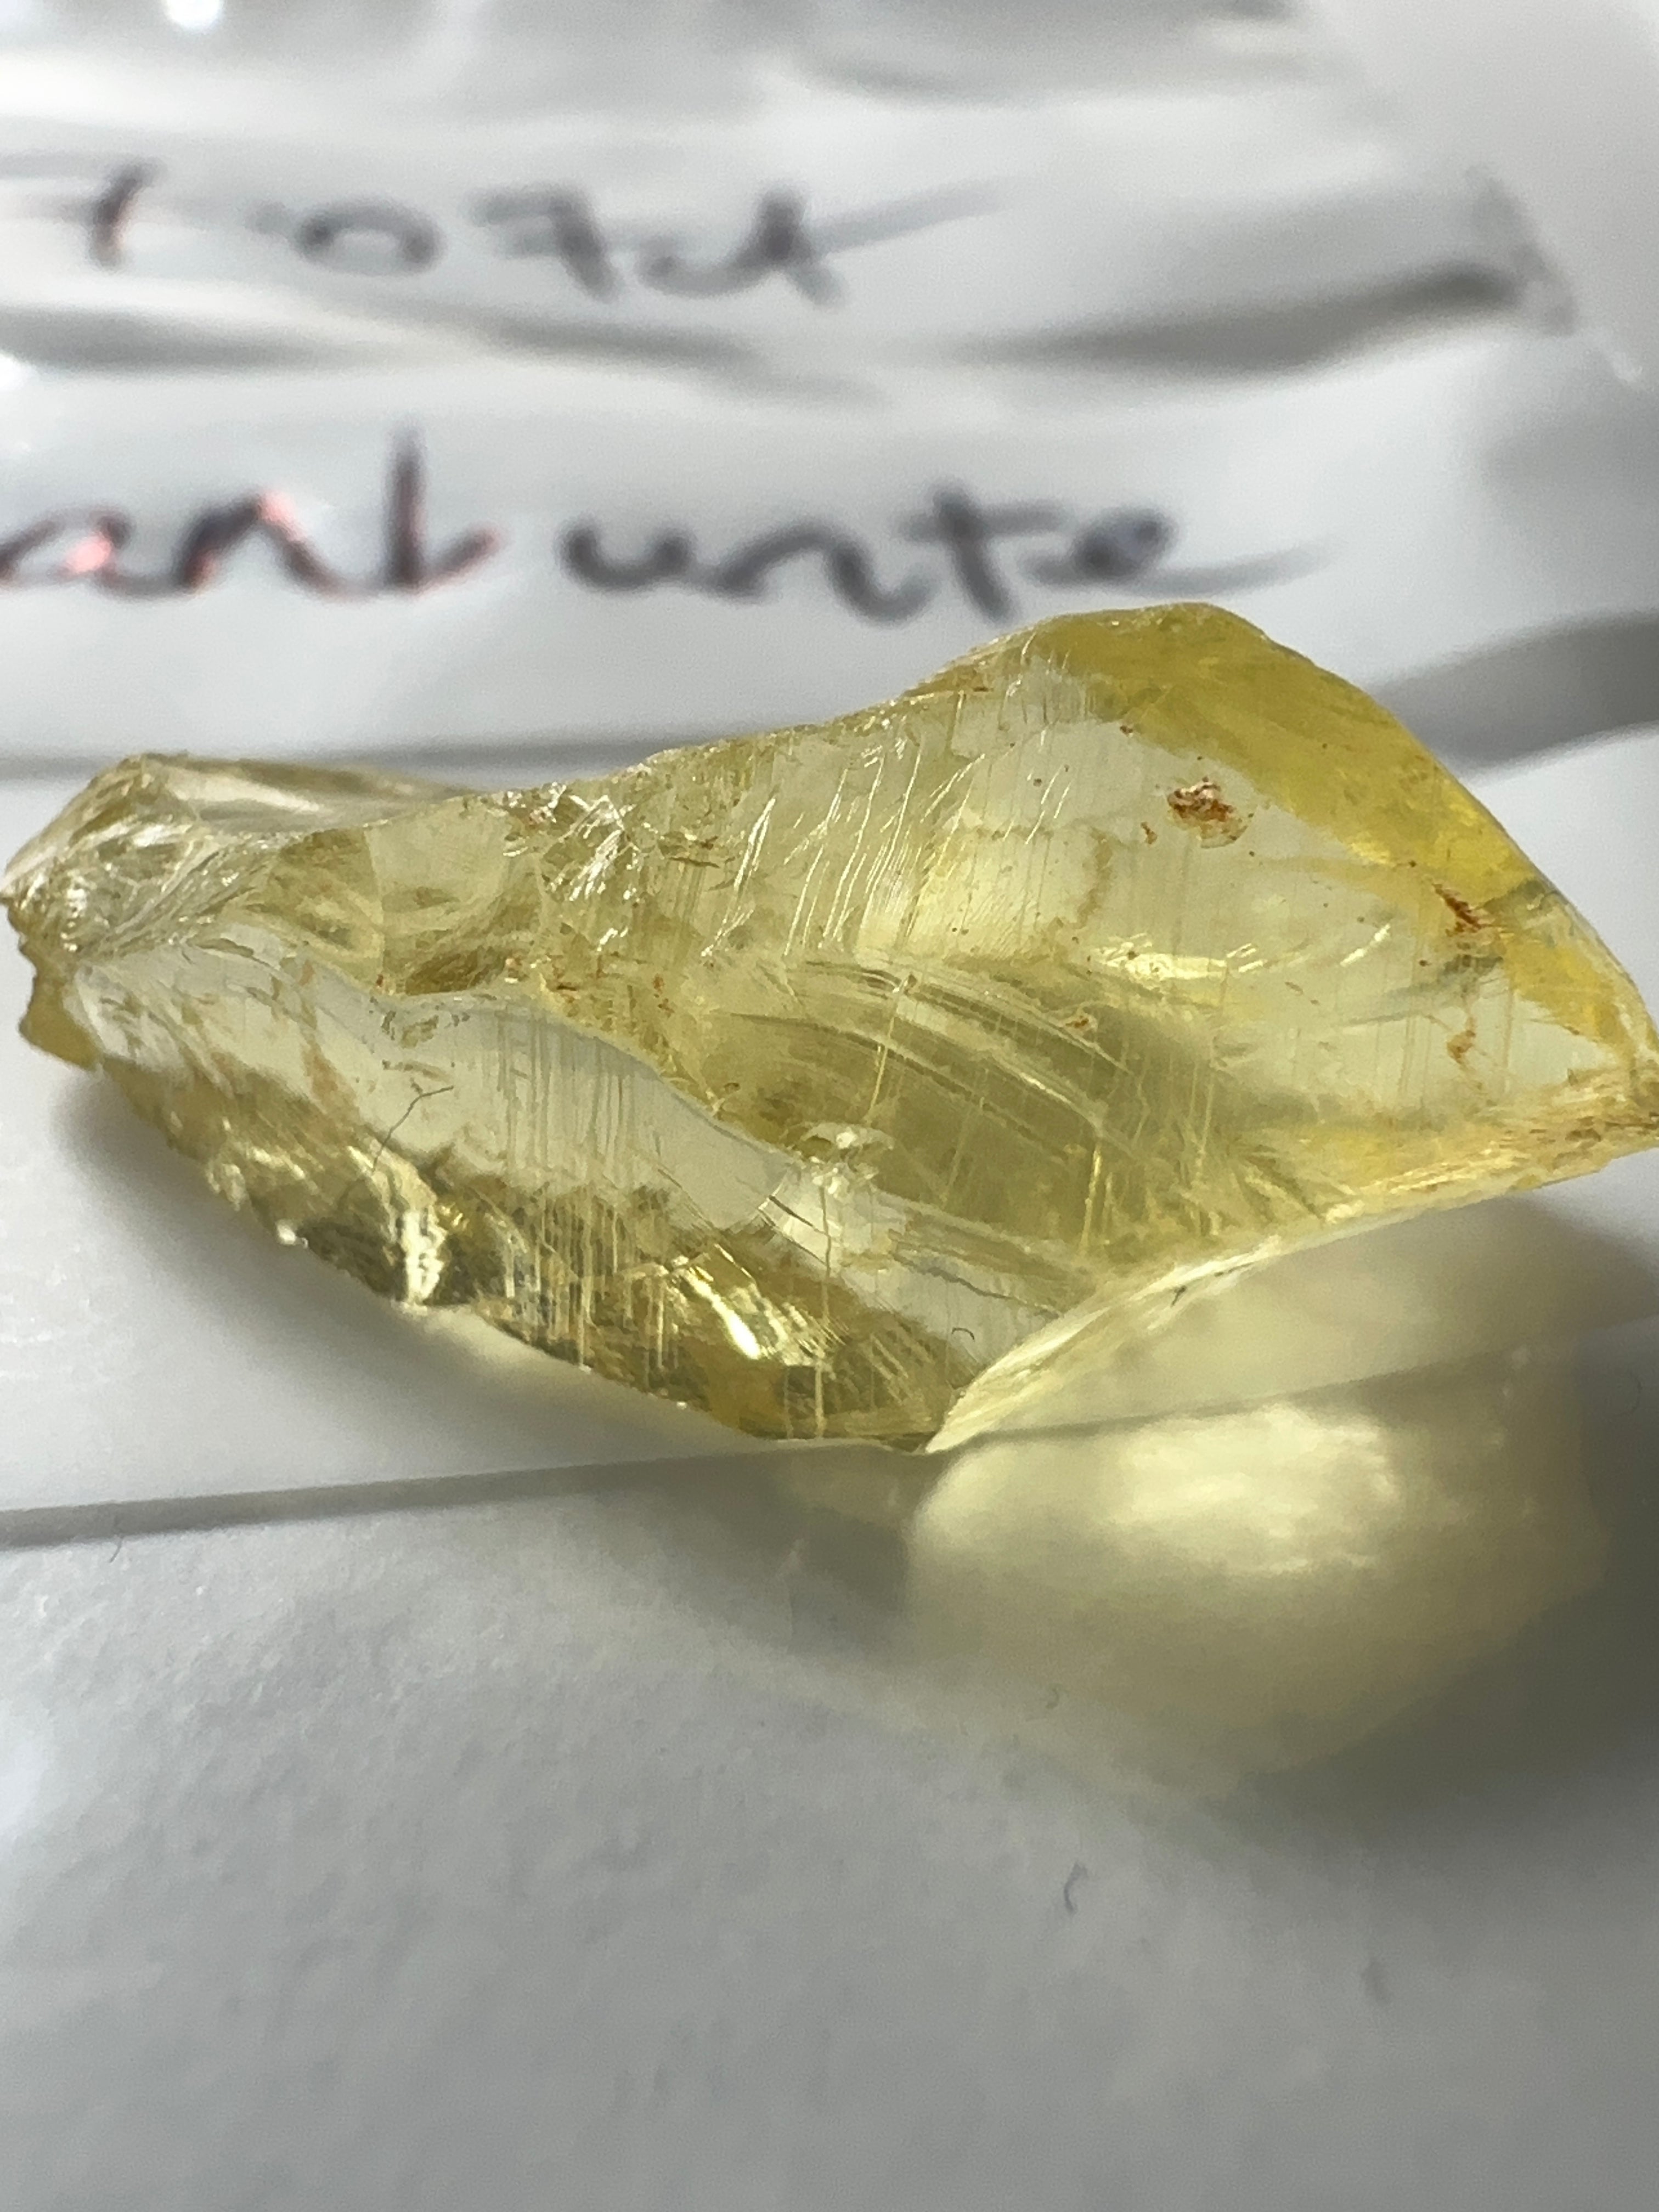 16.96ct Golden Danburite, Tanzania, Untreated Unheated. Precision Cut, Collectors Stone, VERY RARE AND DIFFICULT TO GET IN THIS SIZE